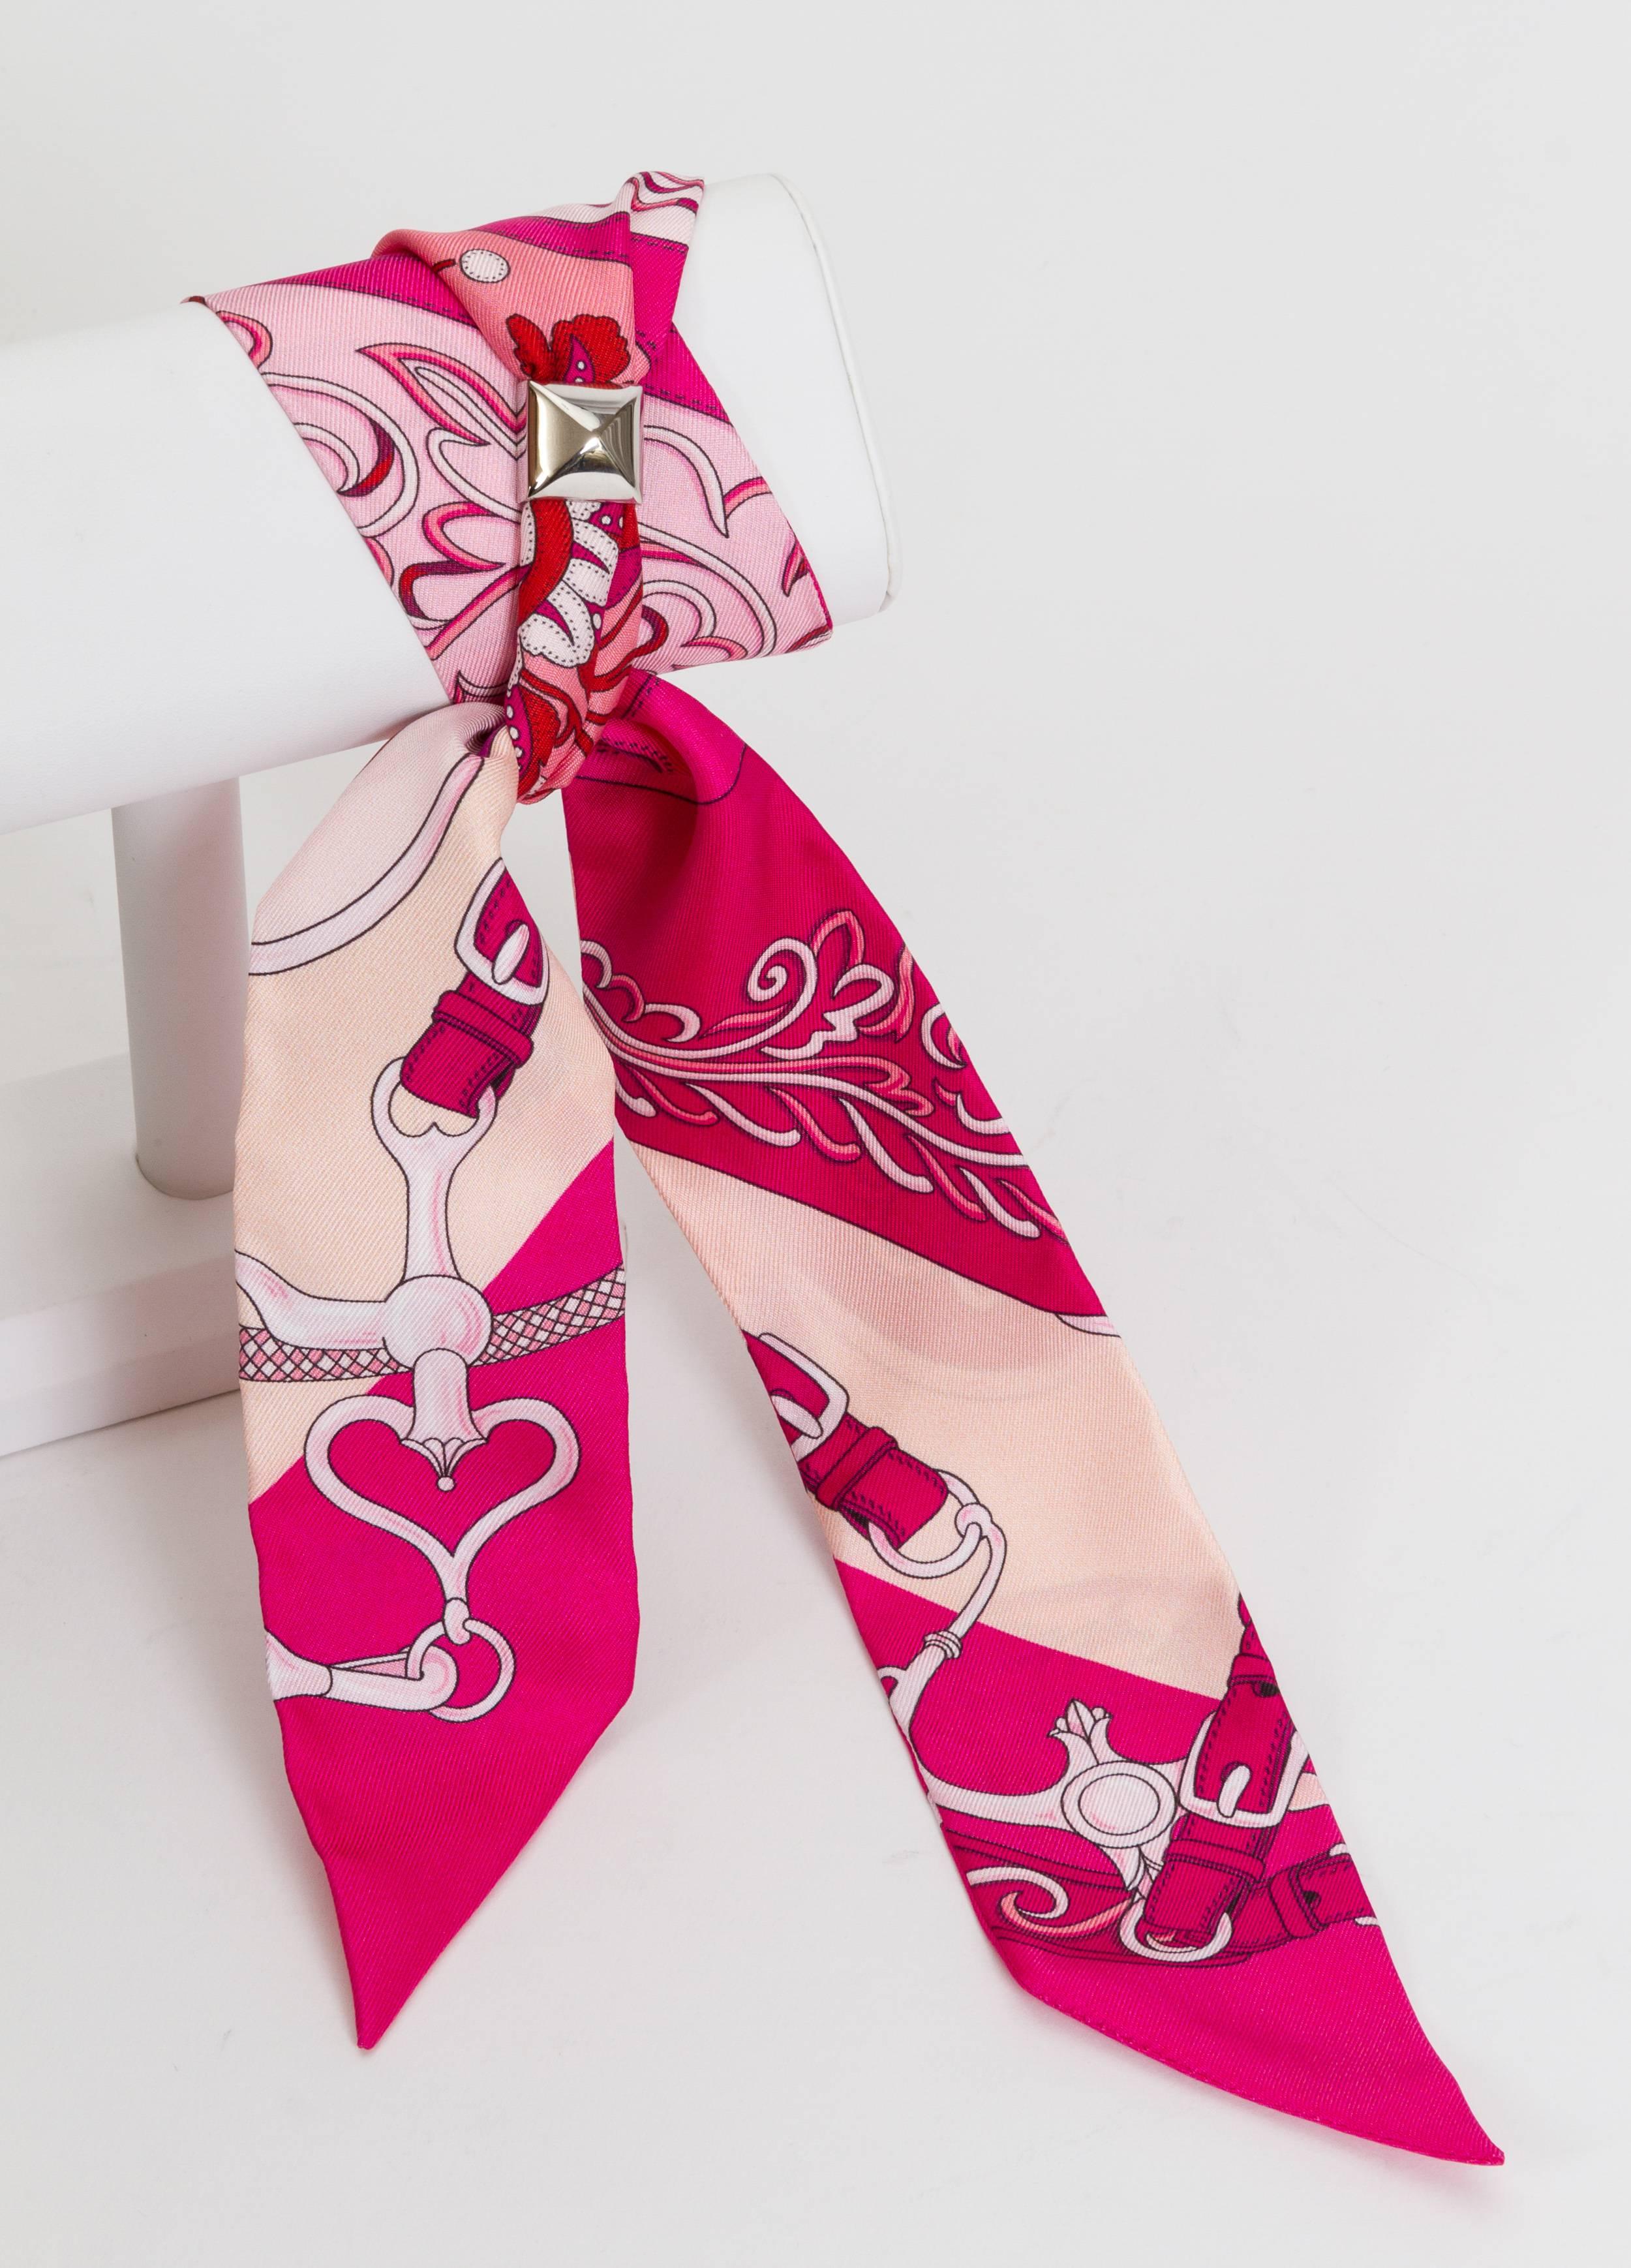 Hermès 100% silk Twilly hot pink flower design with palladium medor metal slide. Can be worn as a bracelet or a scarf. Comes with original box and ribbon.